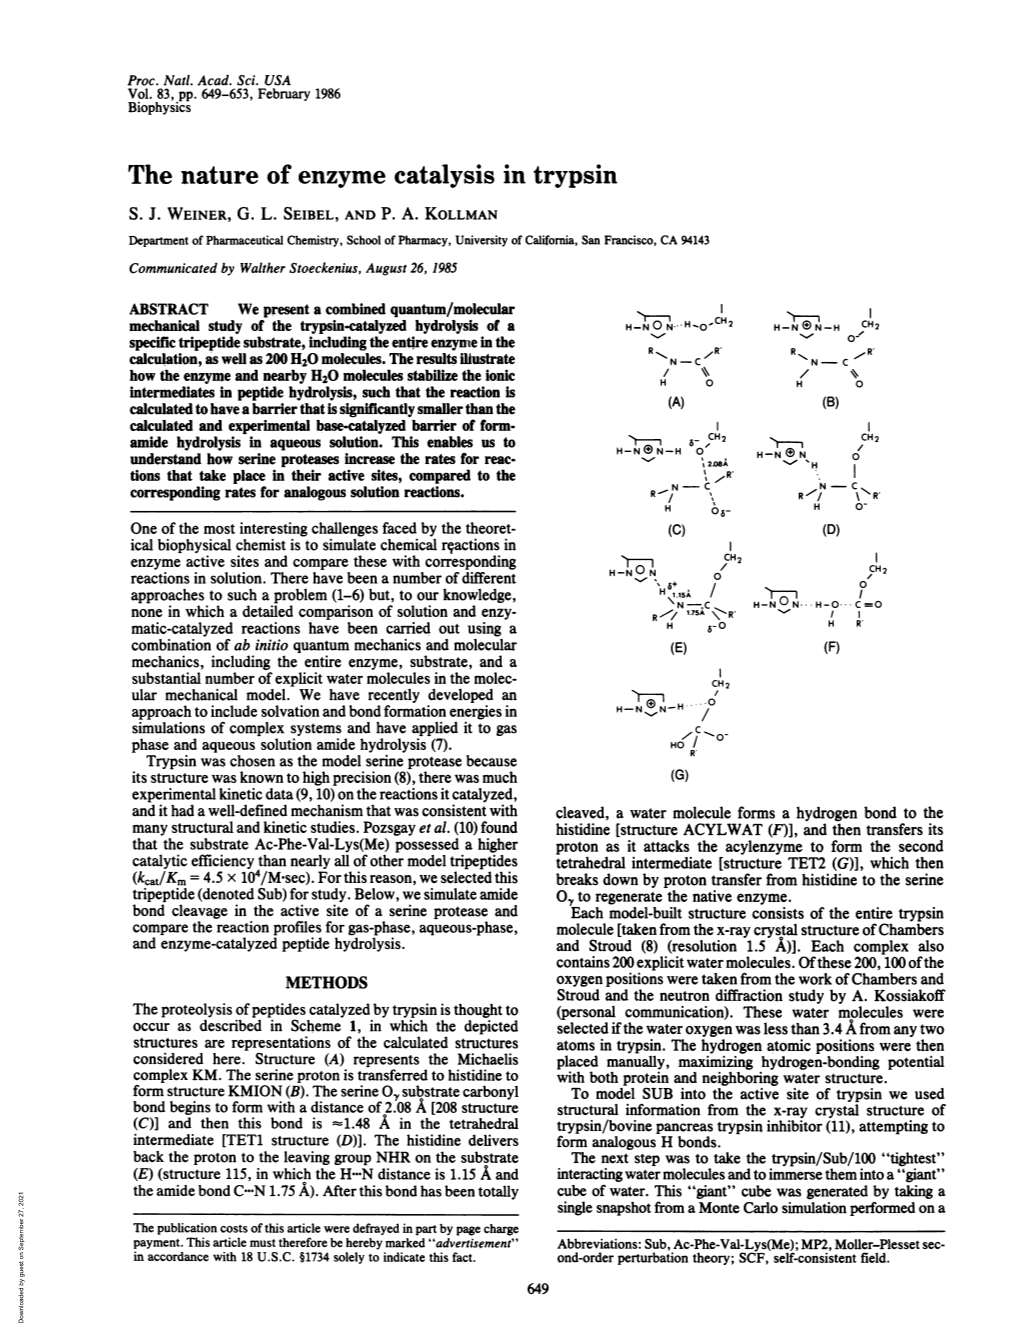 The Nature of Enzyme Catalysis in Trypsin S